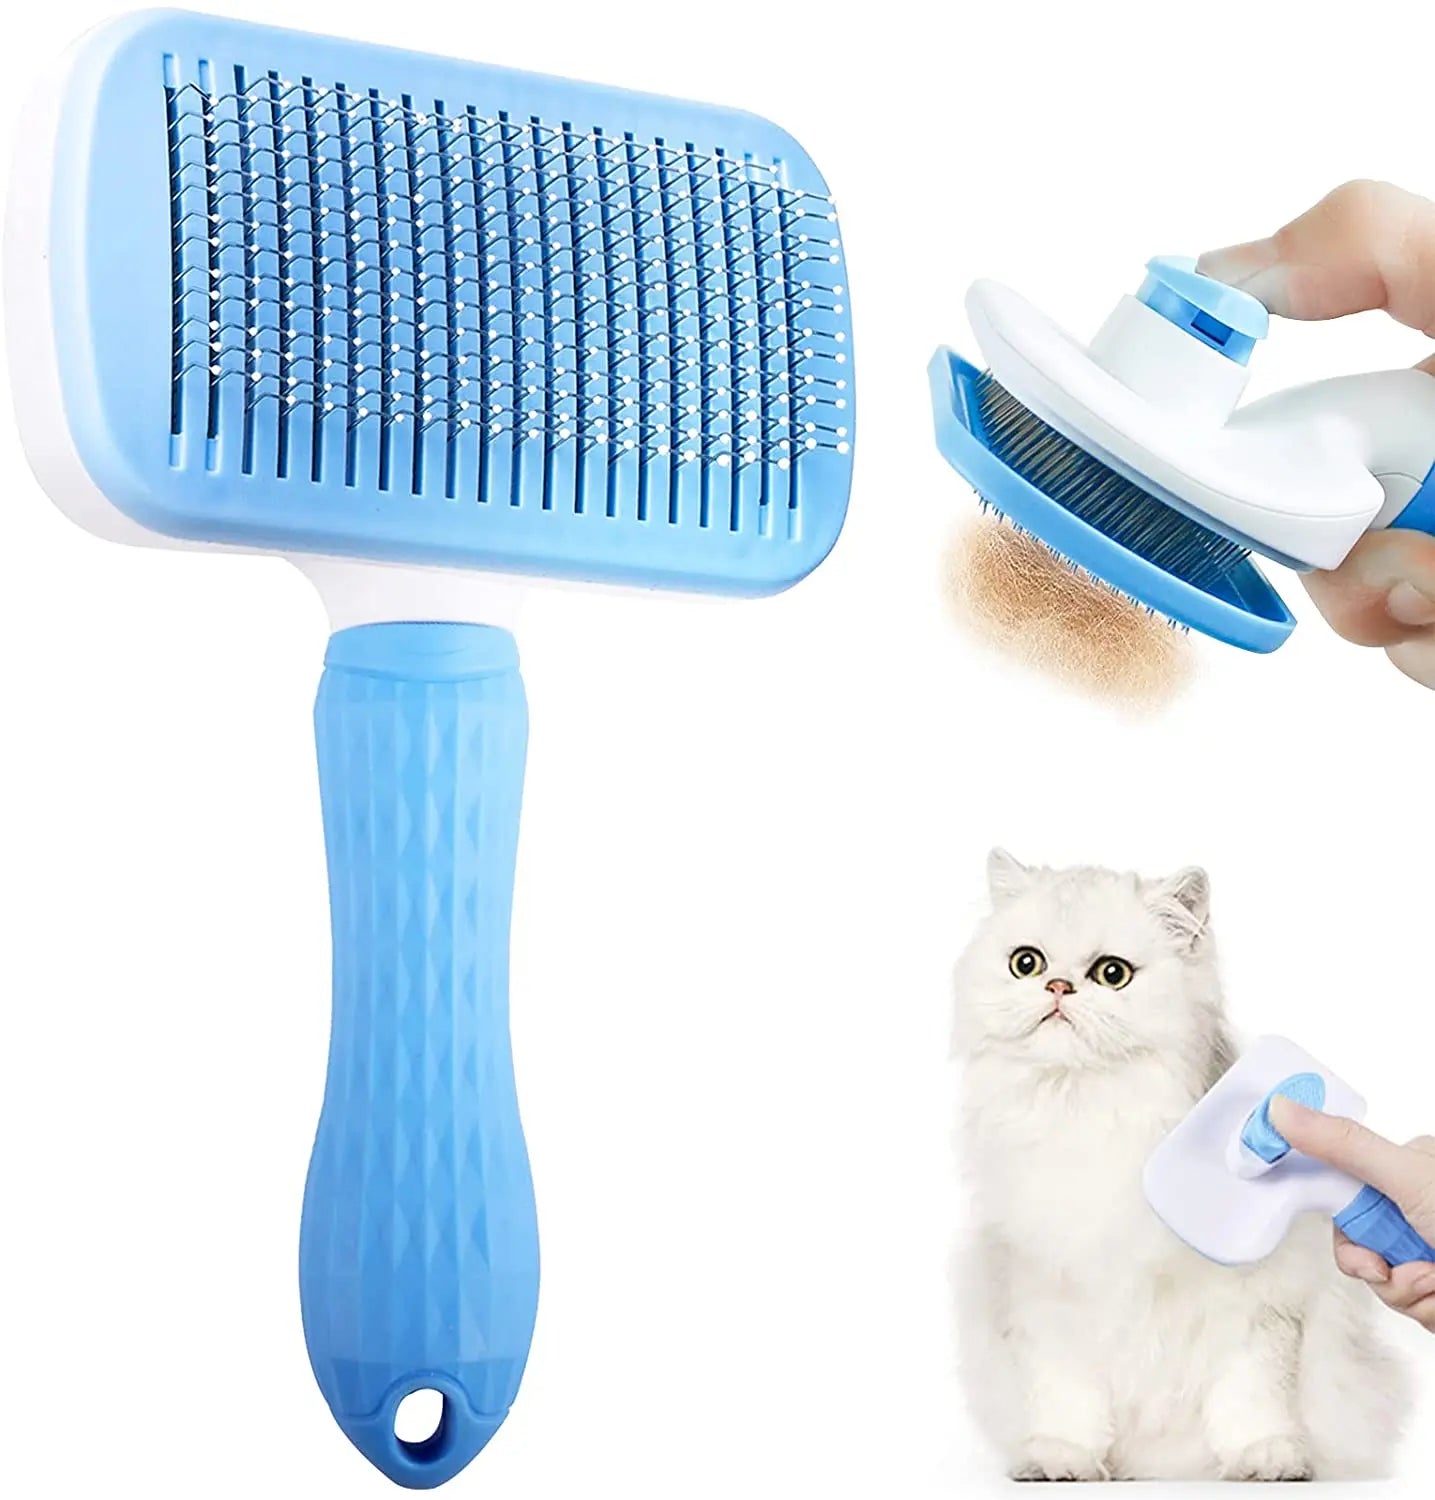 Pet Hair Grooming Brush for Long Hair Dogs - Efficient Hair Removal & Care  petlums.com Square Blue  